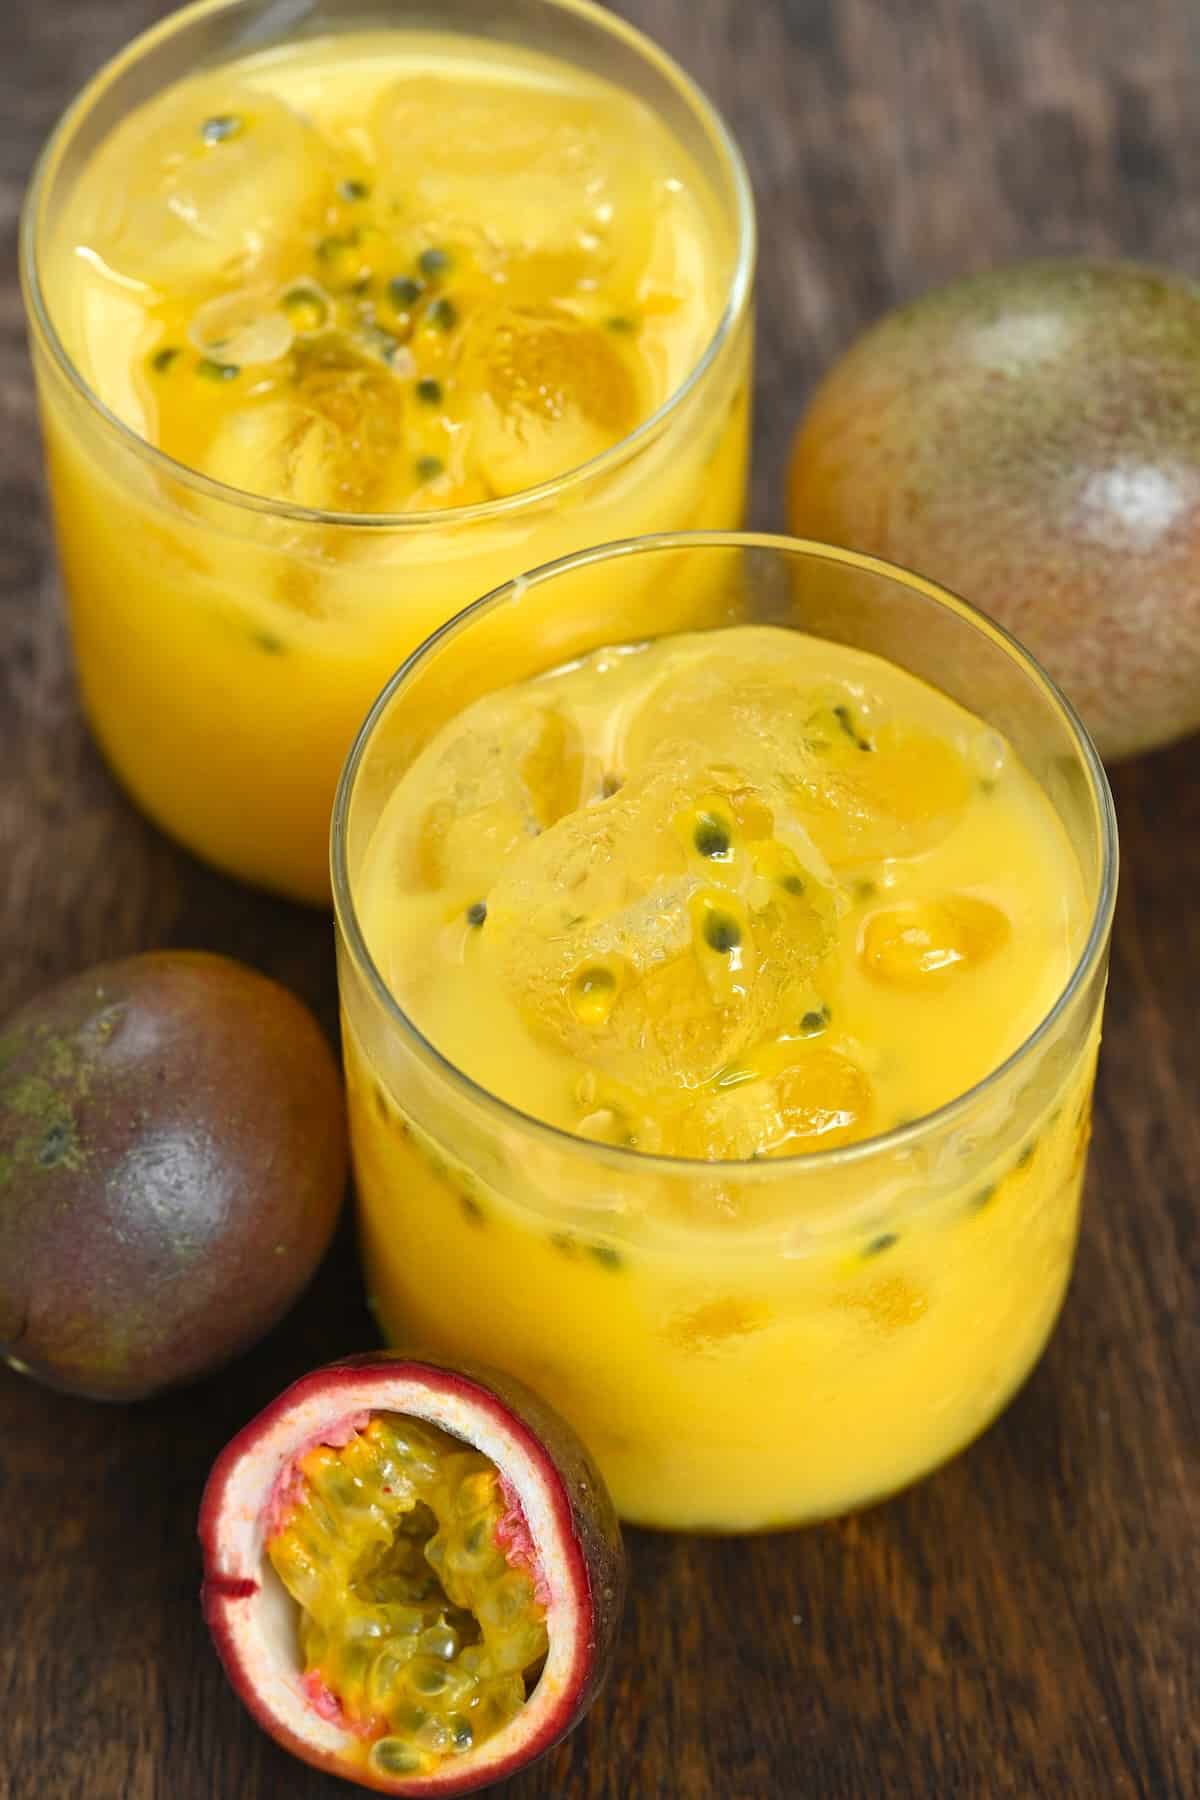 Diskutere Forbedre Rationalisering How to Make Passion Fruit Juice (2 Methods) - Alphafoodie